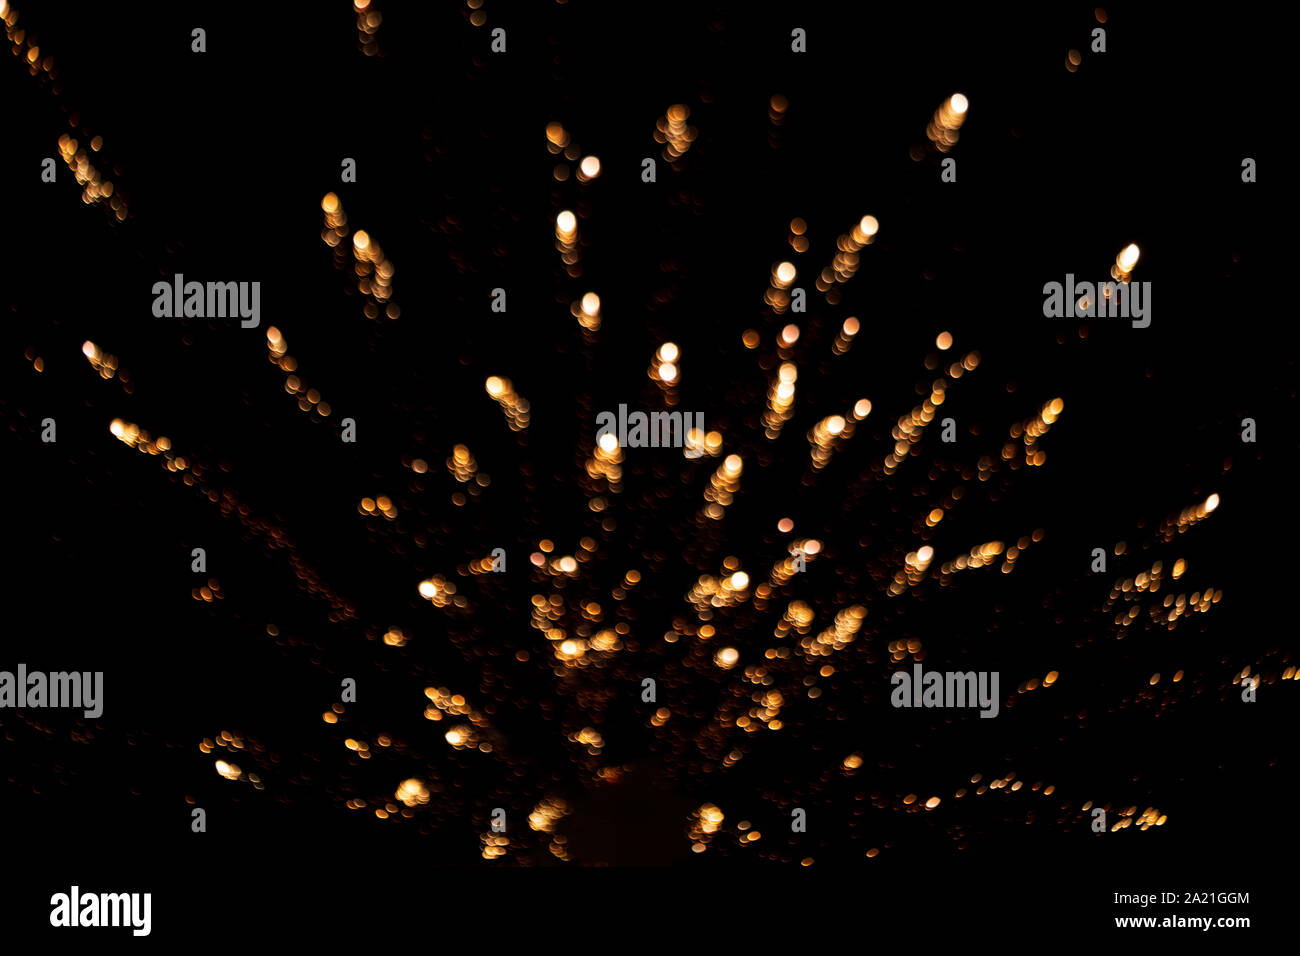 Abstract blurred golden yellow fireworks light up the dark black sky with bokeh background. Concept for diwali, new year, party, 4th july, anniversary Stock Photo